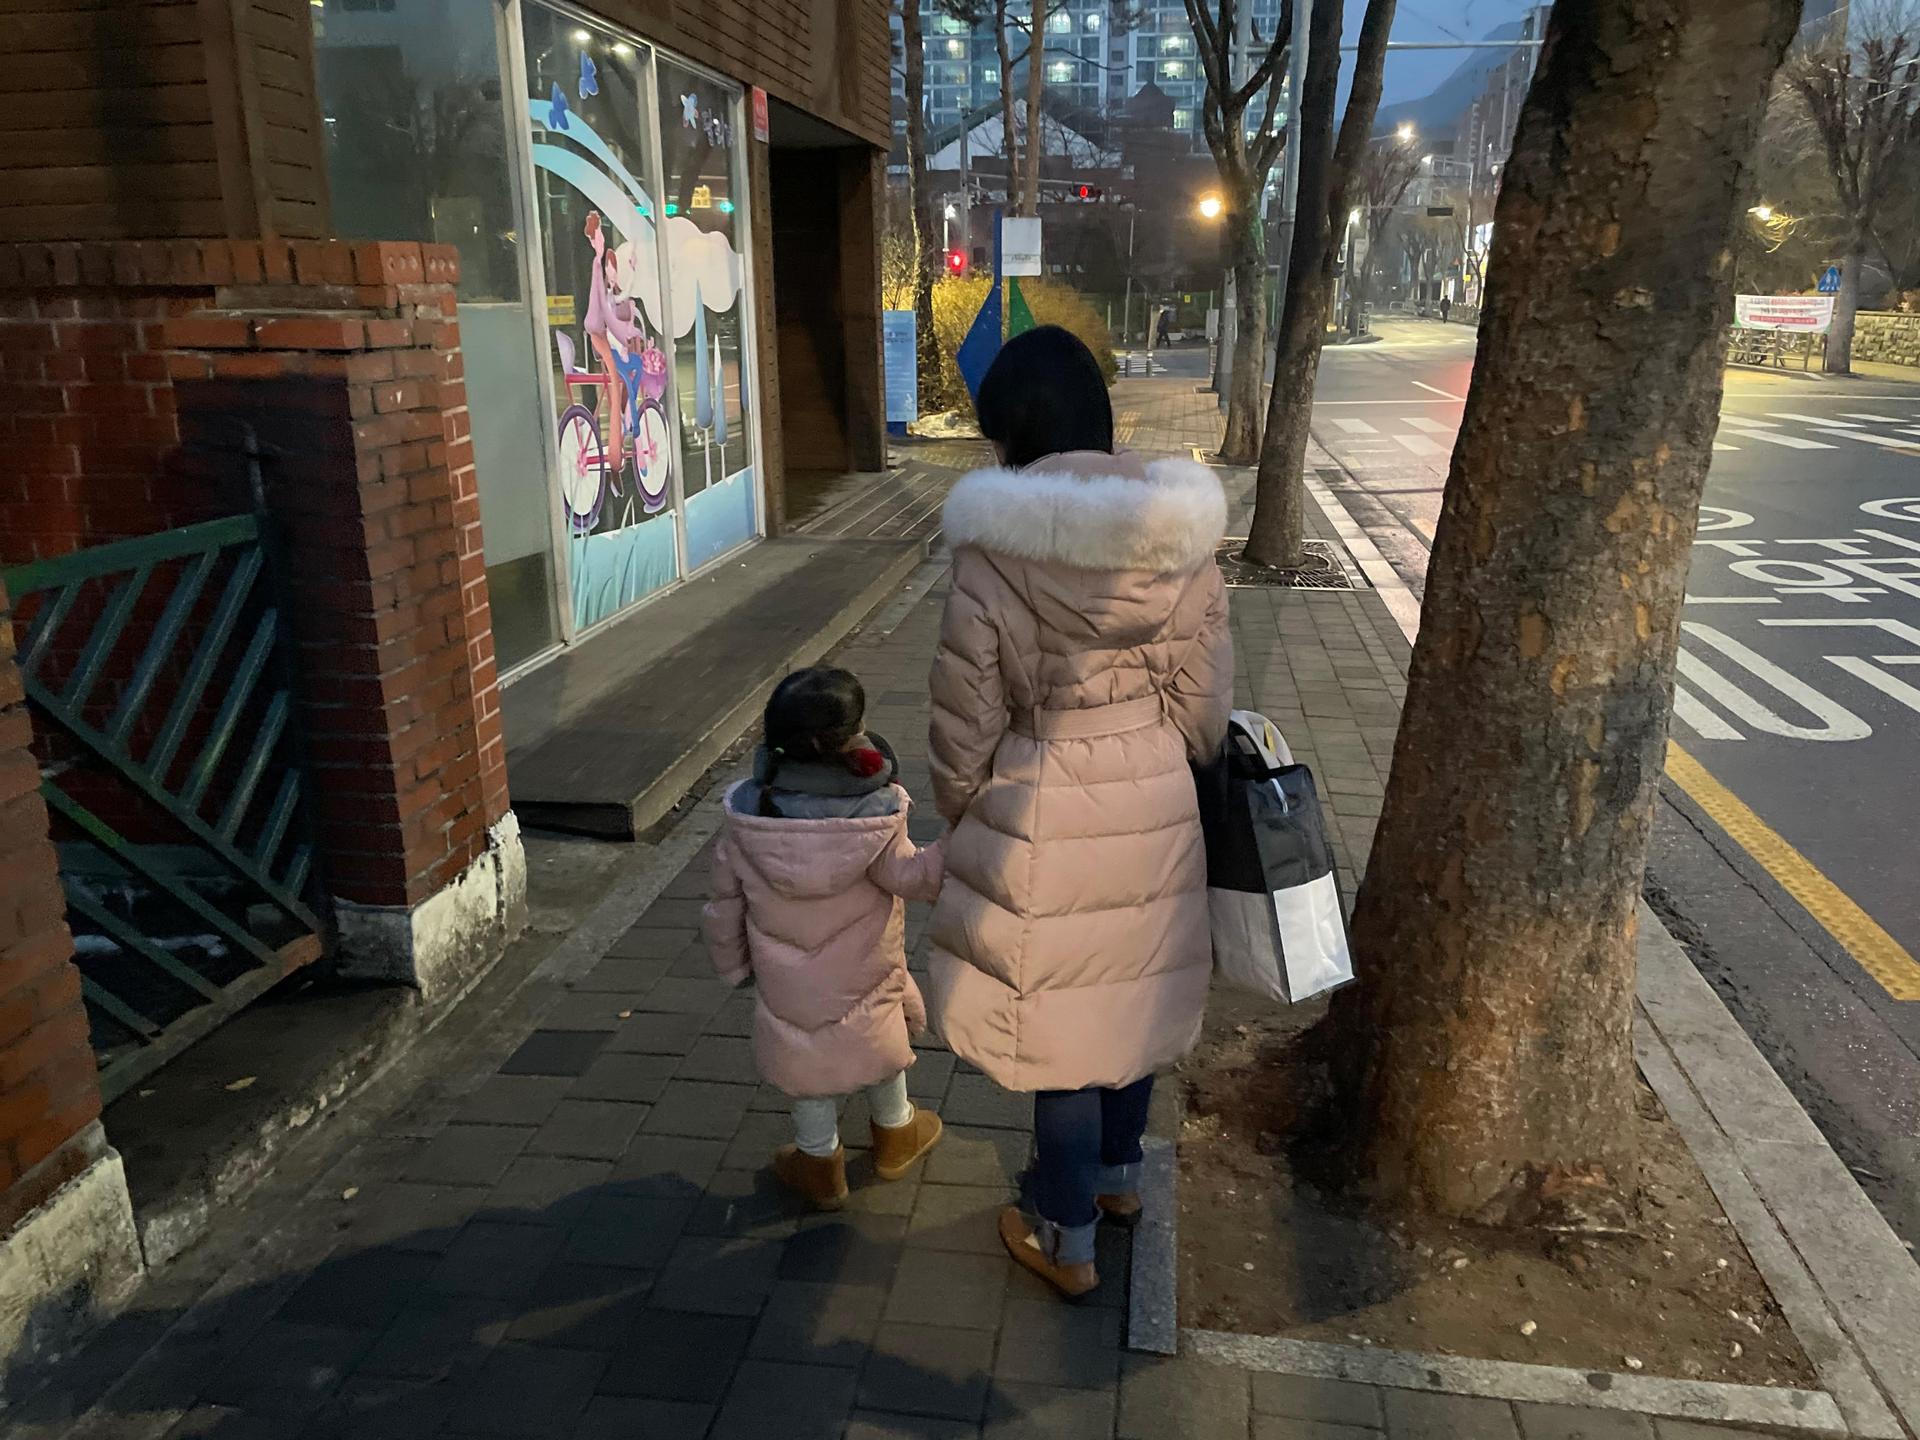 Kim, an advocate at the Korean Unwed Mothers Families' Association, a support group in Seoul, South Korea, walks with her daughter. She asked that her full name not be used due to the stigma associated with being a single mother.